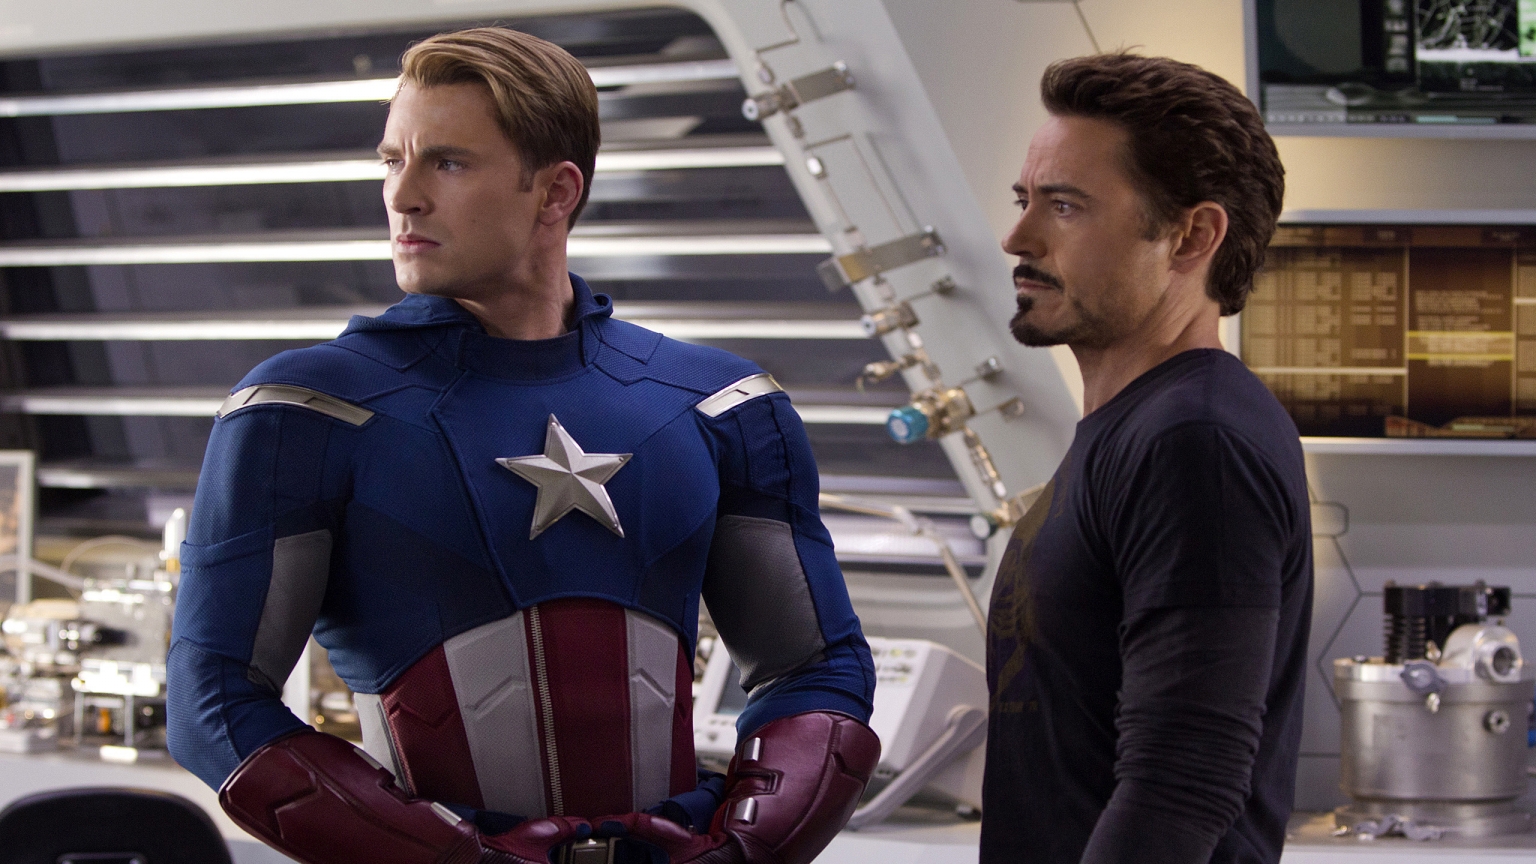 Captain America and Iron Man for 1536 x 864 HDTV resolution